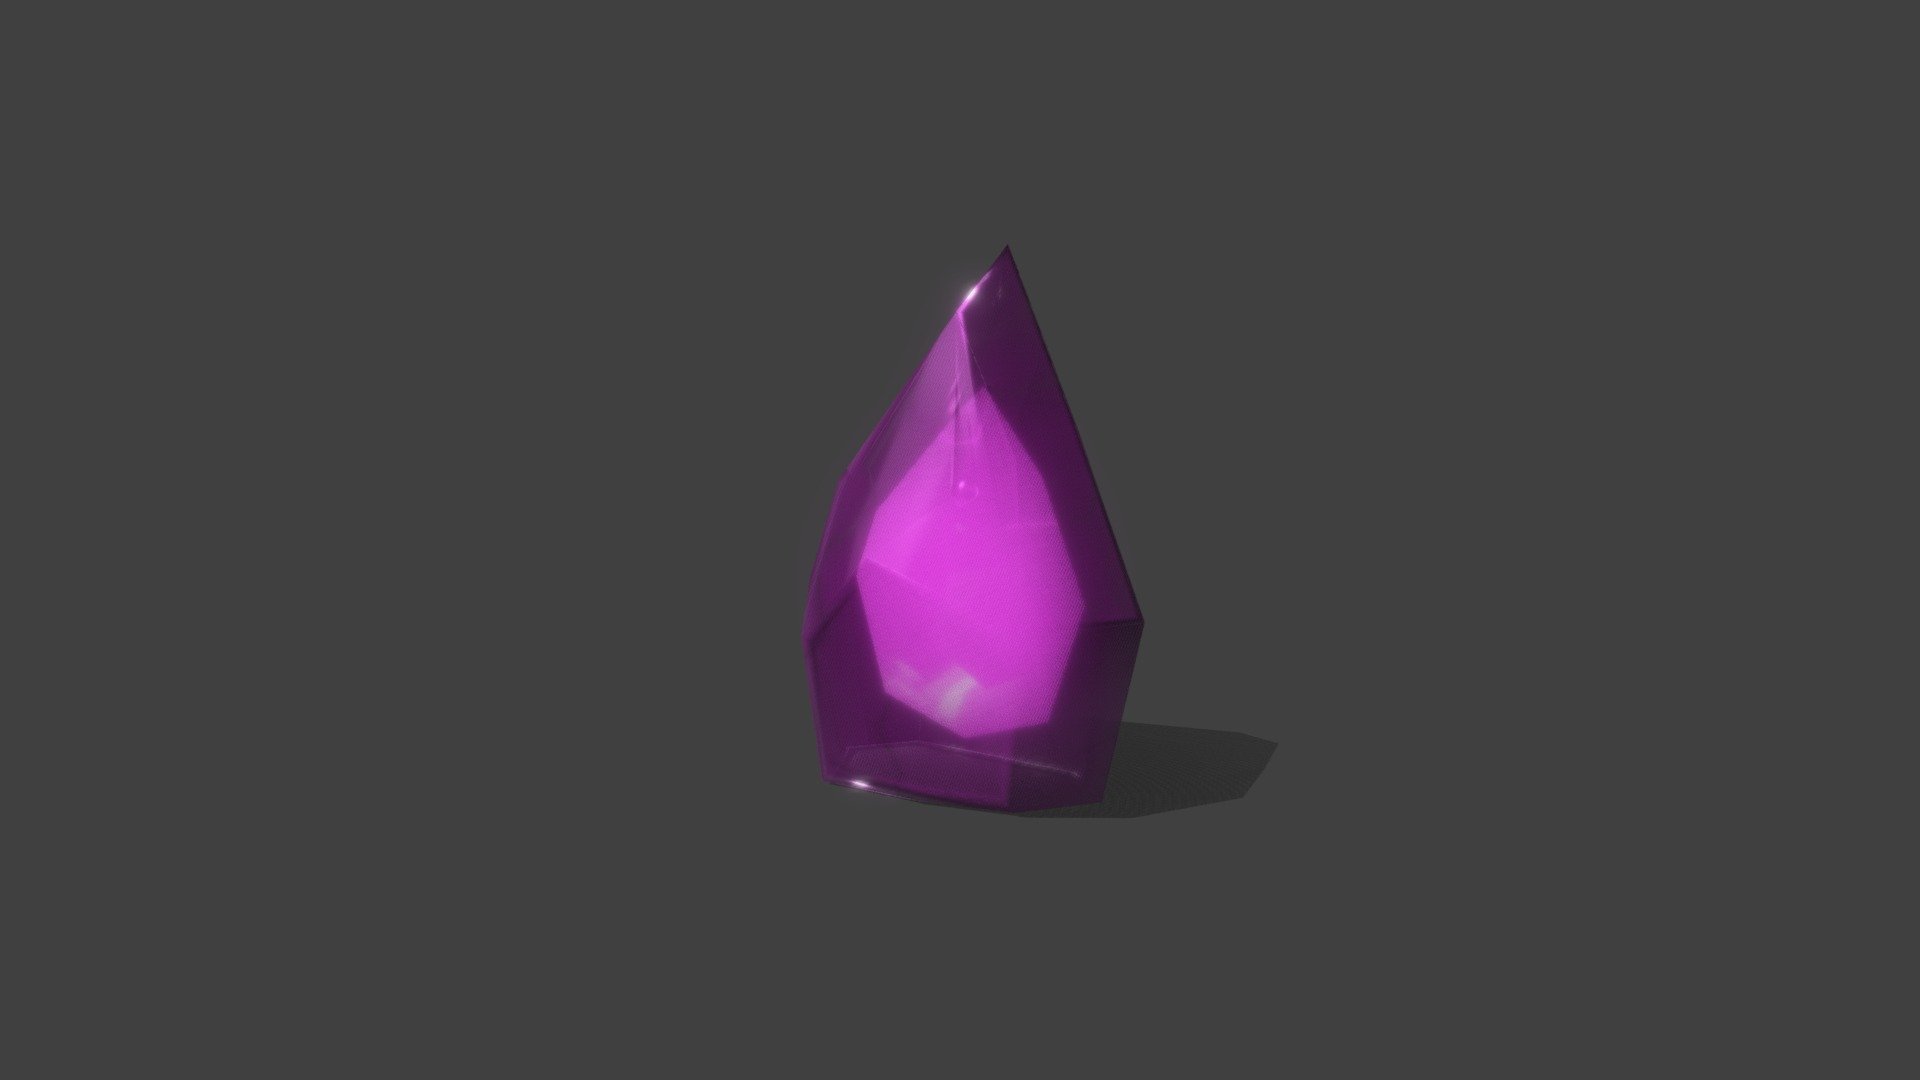 Stylised Purple Crystal

Great for decoration or use in environments.

Super Low Poly: 100 Tris
2K Textures - Crystal - Buy Royalty Free 3D model by joseph.casey97 3d model